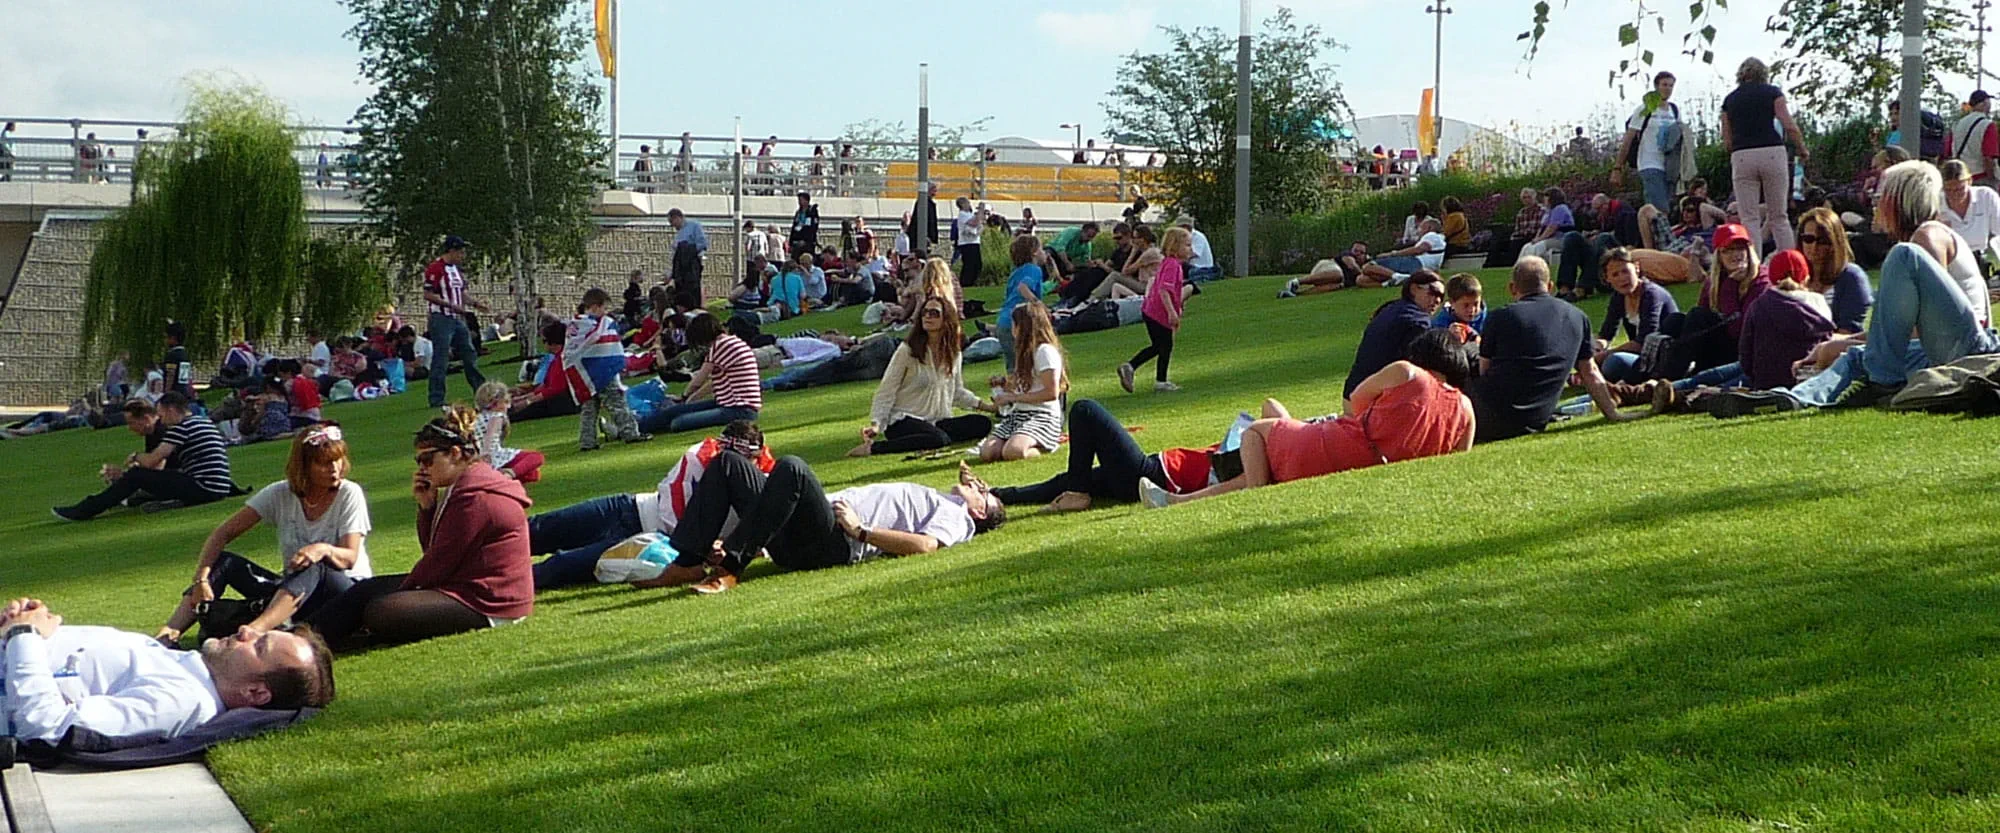 City green space with people relaxing